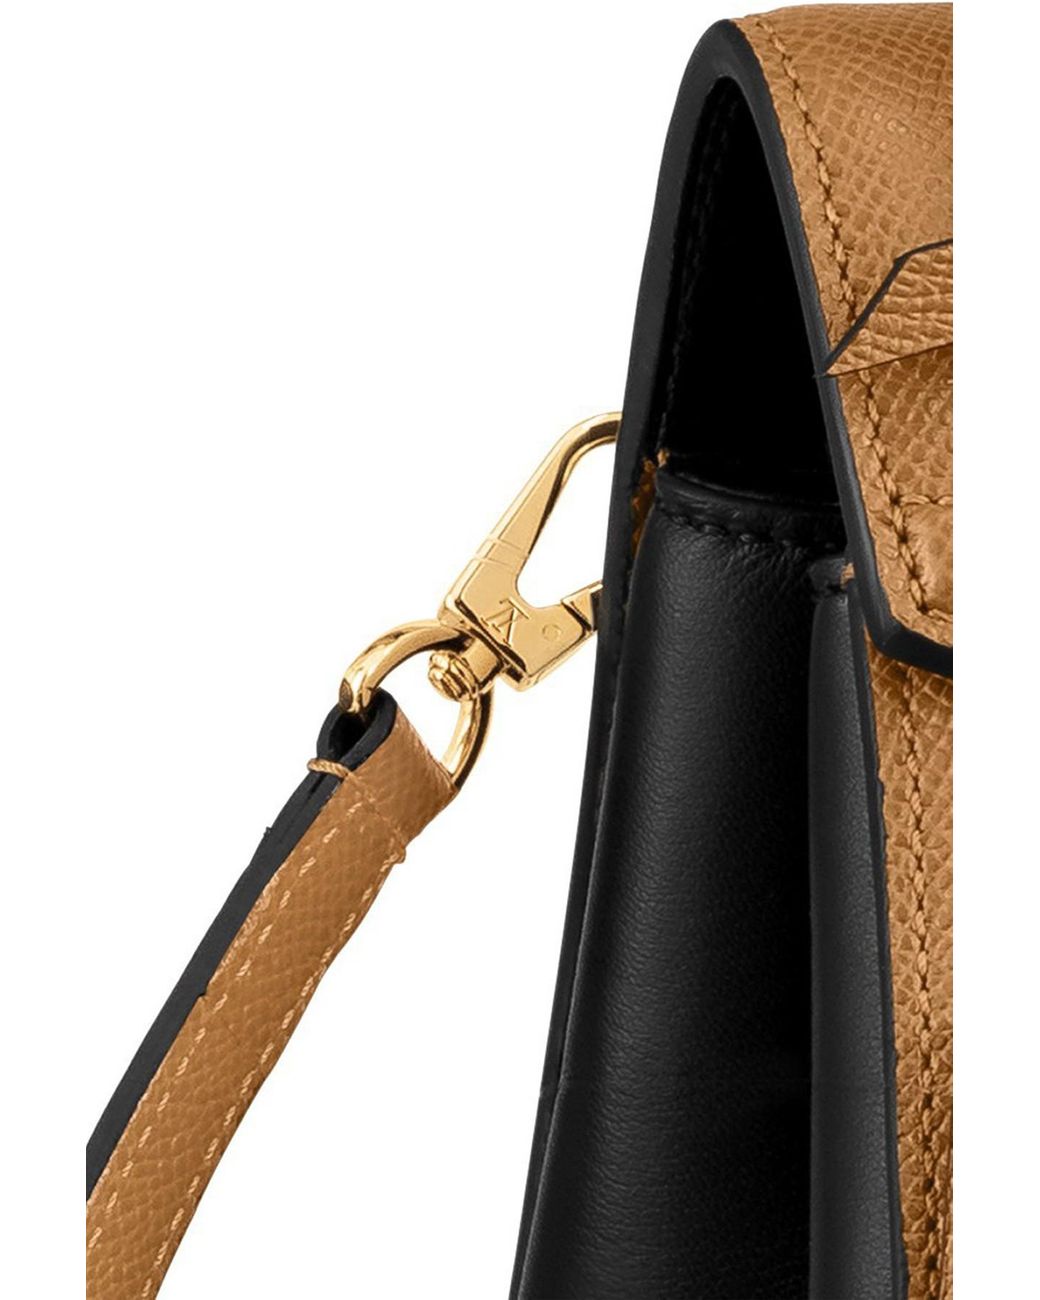 Louis Vuitton - Bridging past to present. The new LV Arch Bag from